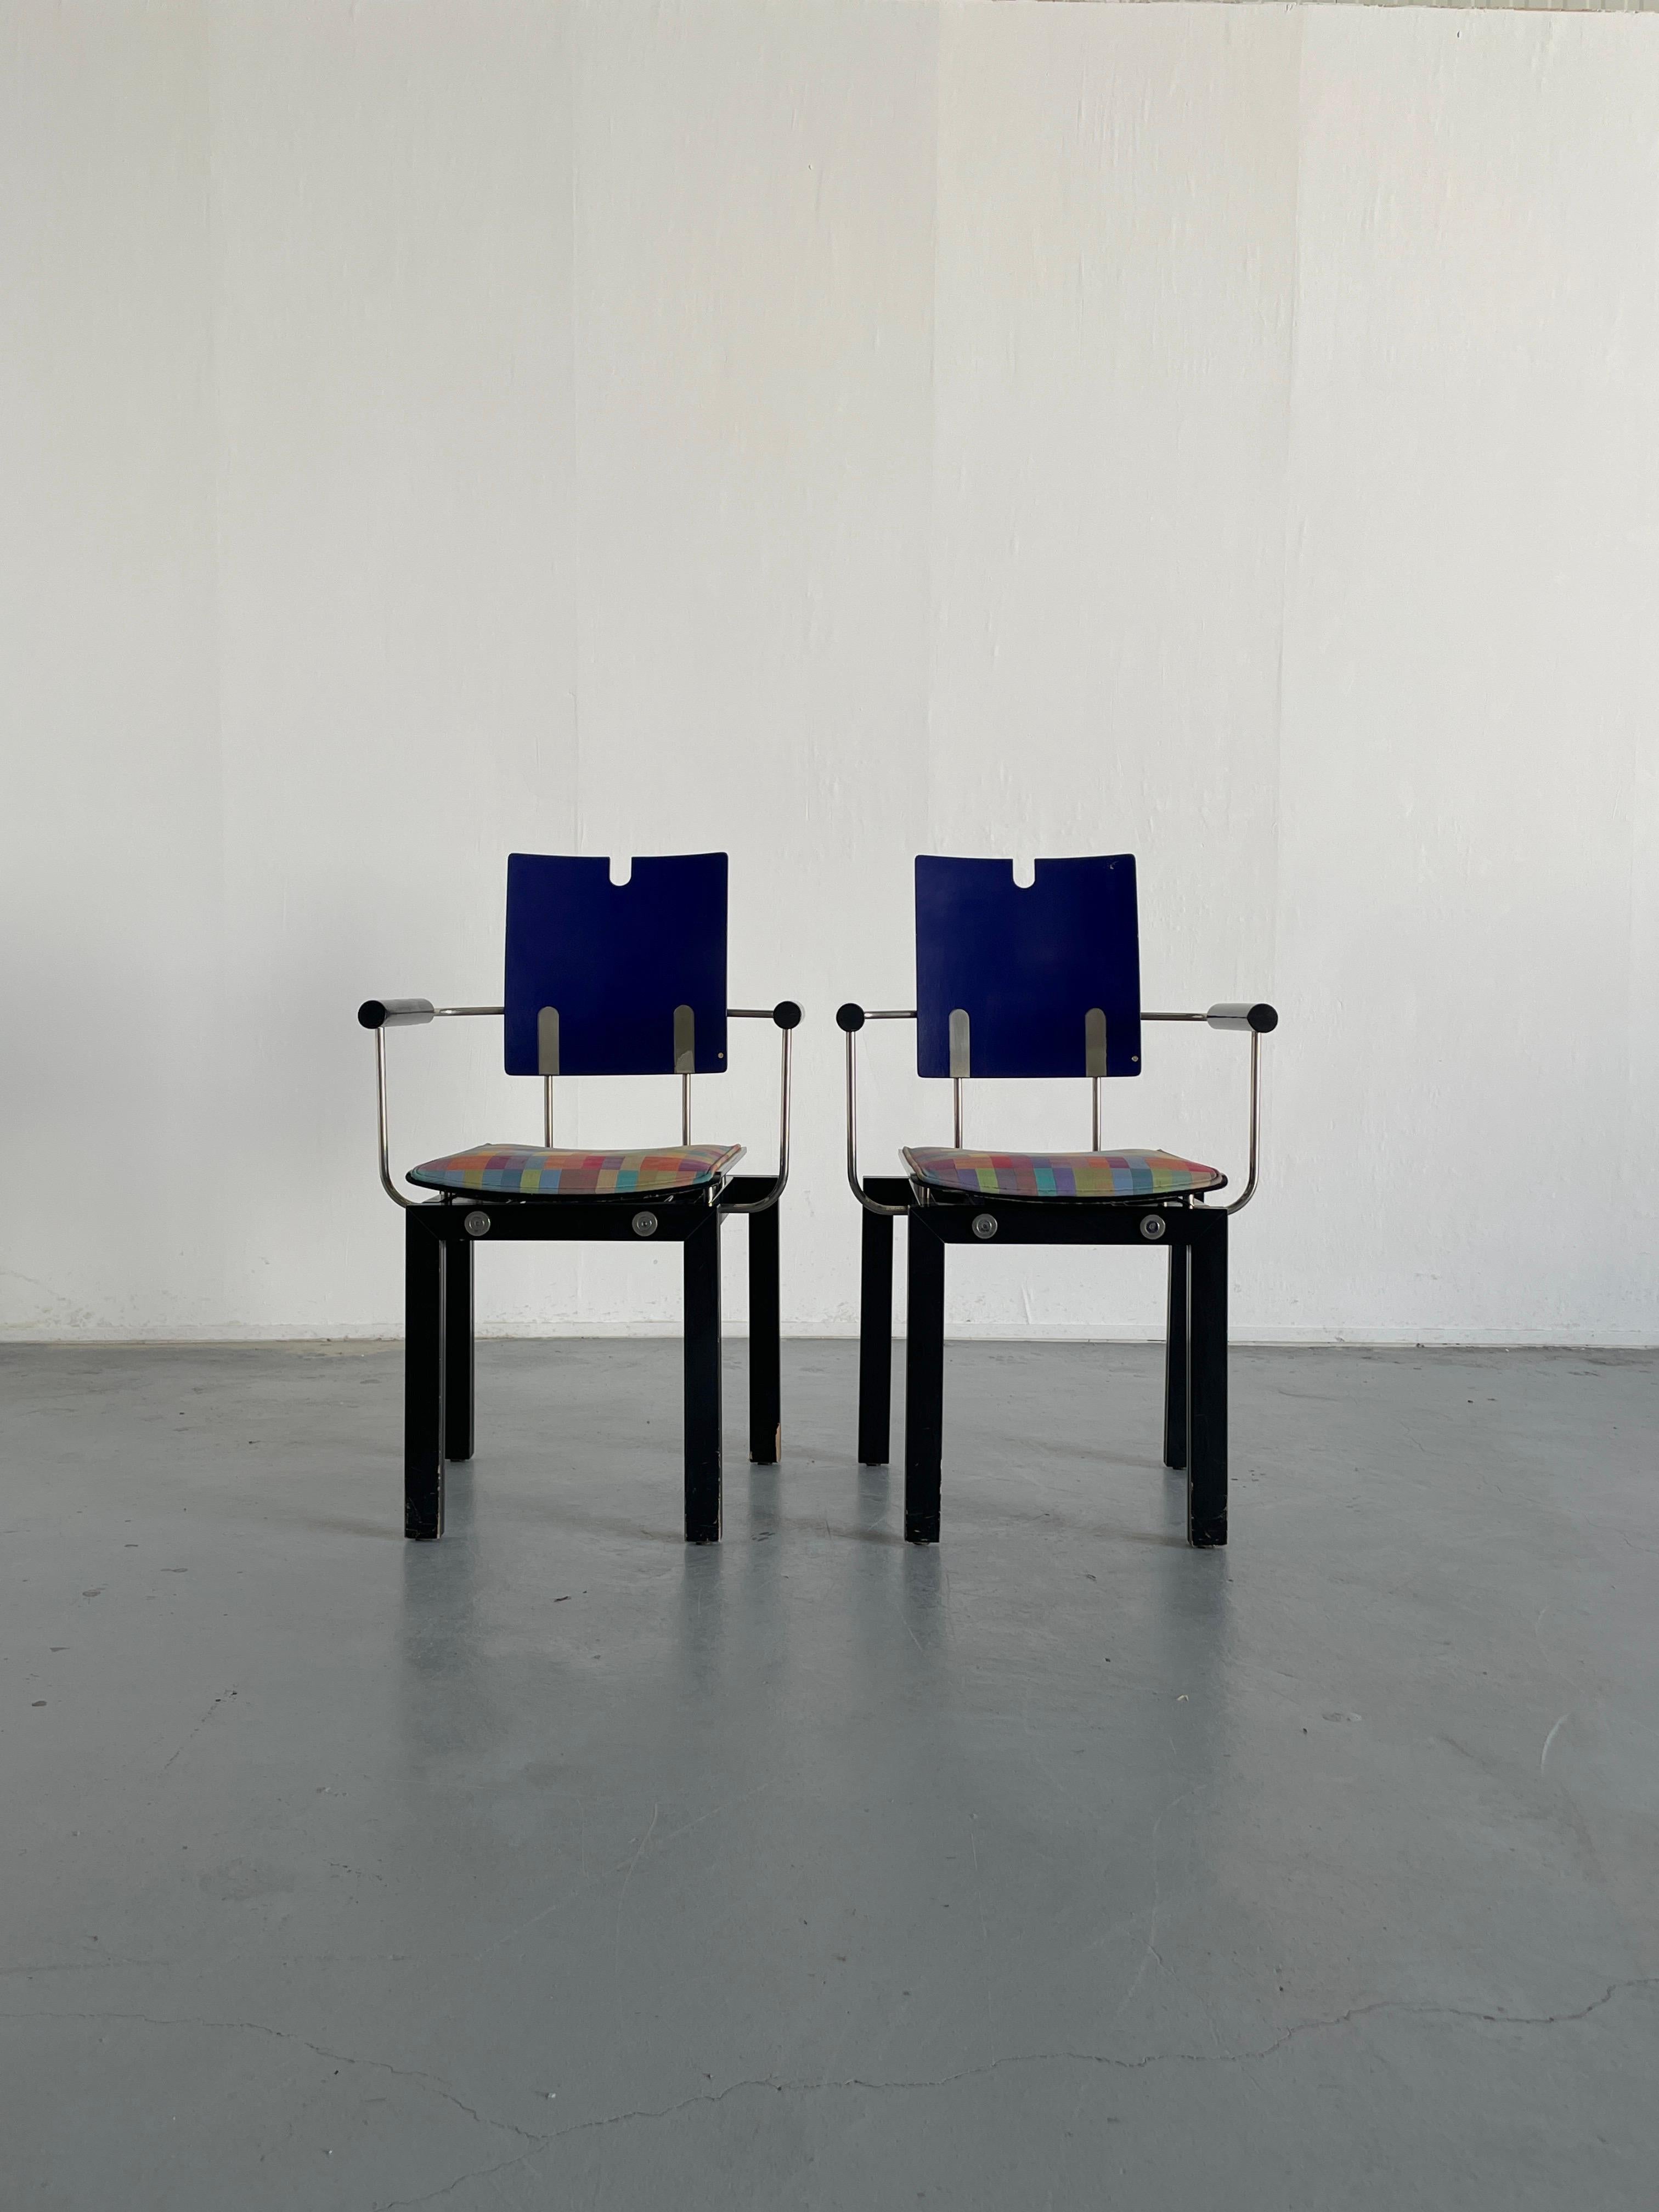 Exceptionally rare and collectible set of two postmodern Memphis era, original Thonet dining chairs. Sculptural, geometrically shaped colourful structure.
Produced by Thonet Vienna in 1994.

Quality made and in very good vintage condition with